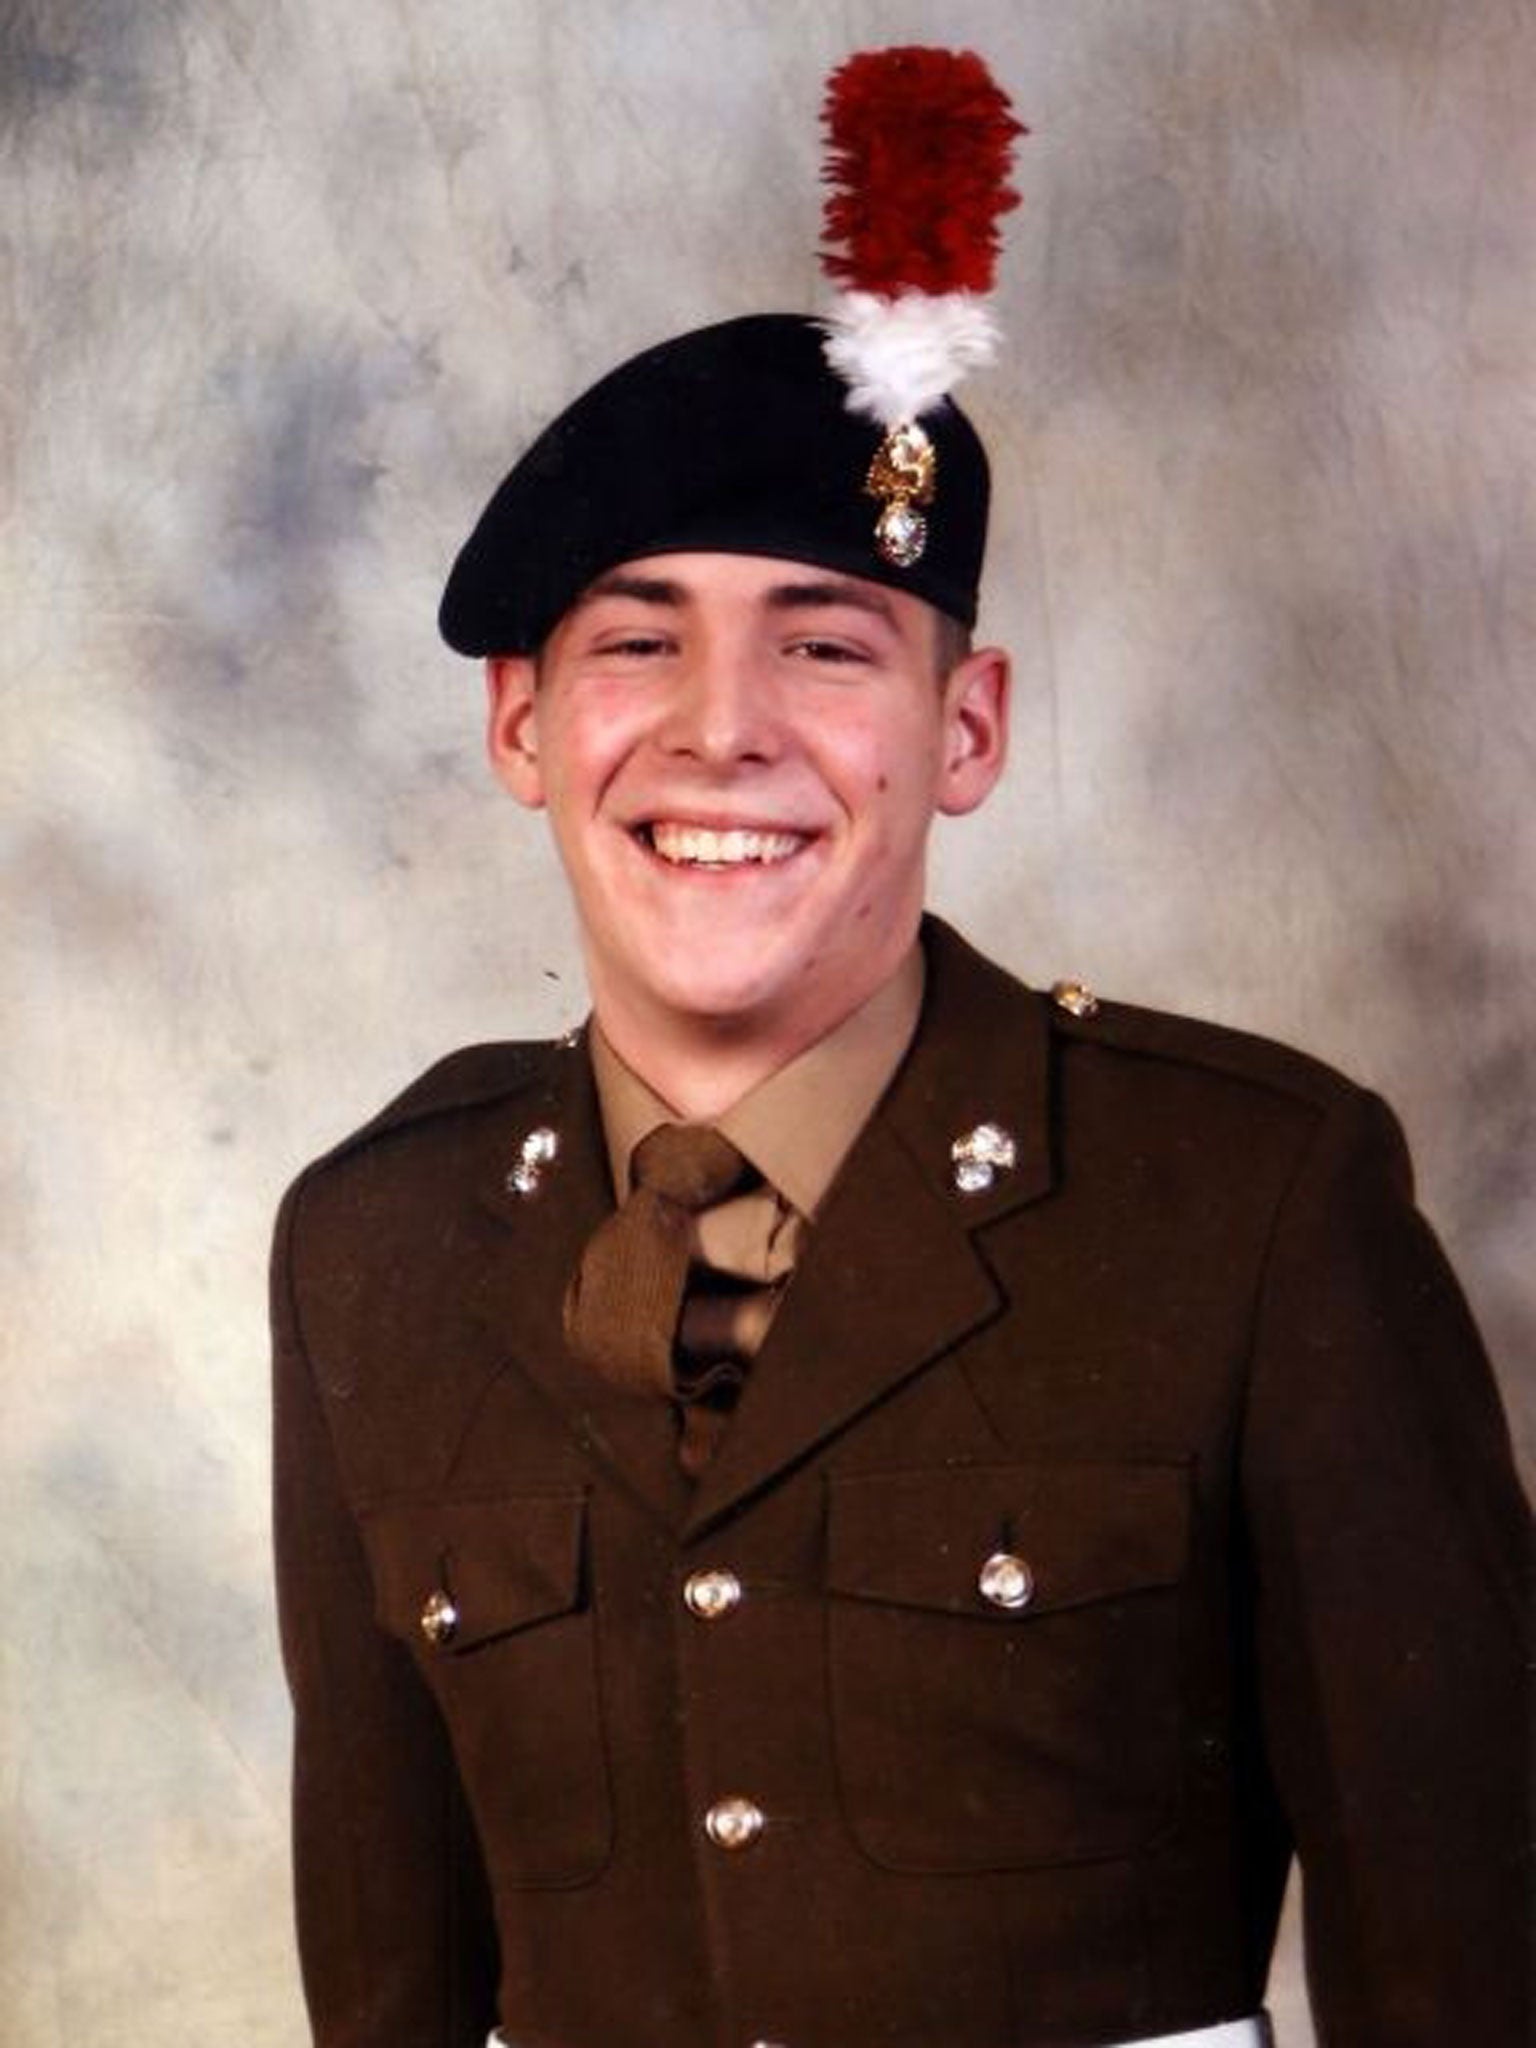 Drummer Lee Rigby of the Royal Regiment of Fusiliers, a British Army soldier, who was attacked and killed by two men near the Royal Artillery Barracks in Woolwich, southeast London.